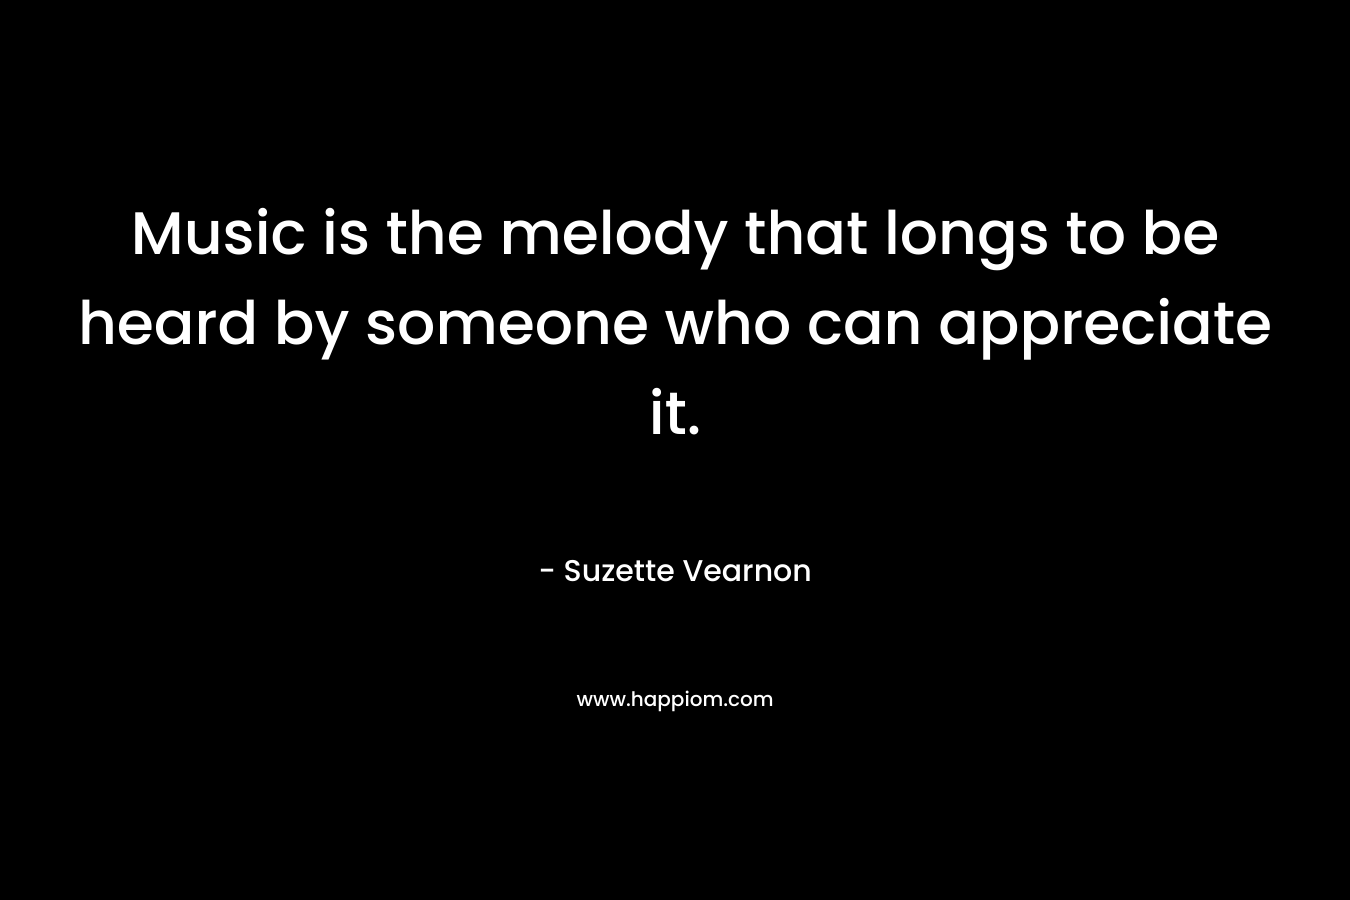 Music is the melody that longs to be heard by someone who can appreciate it.